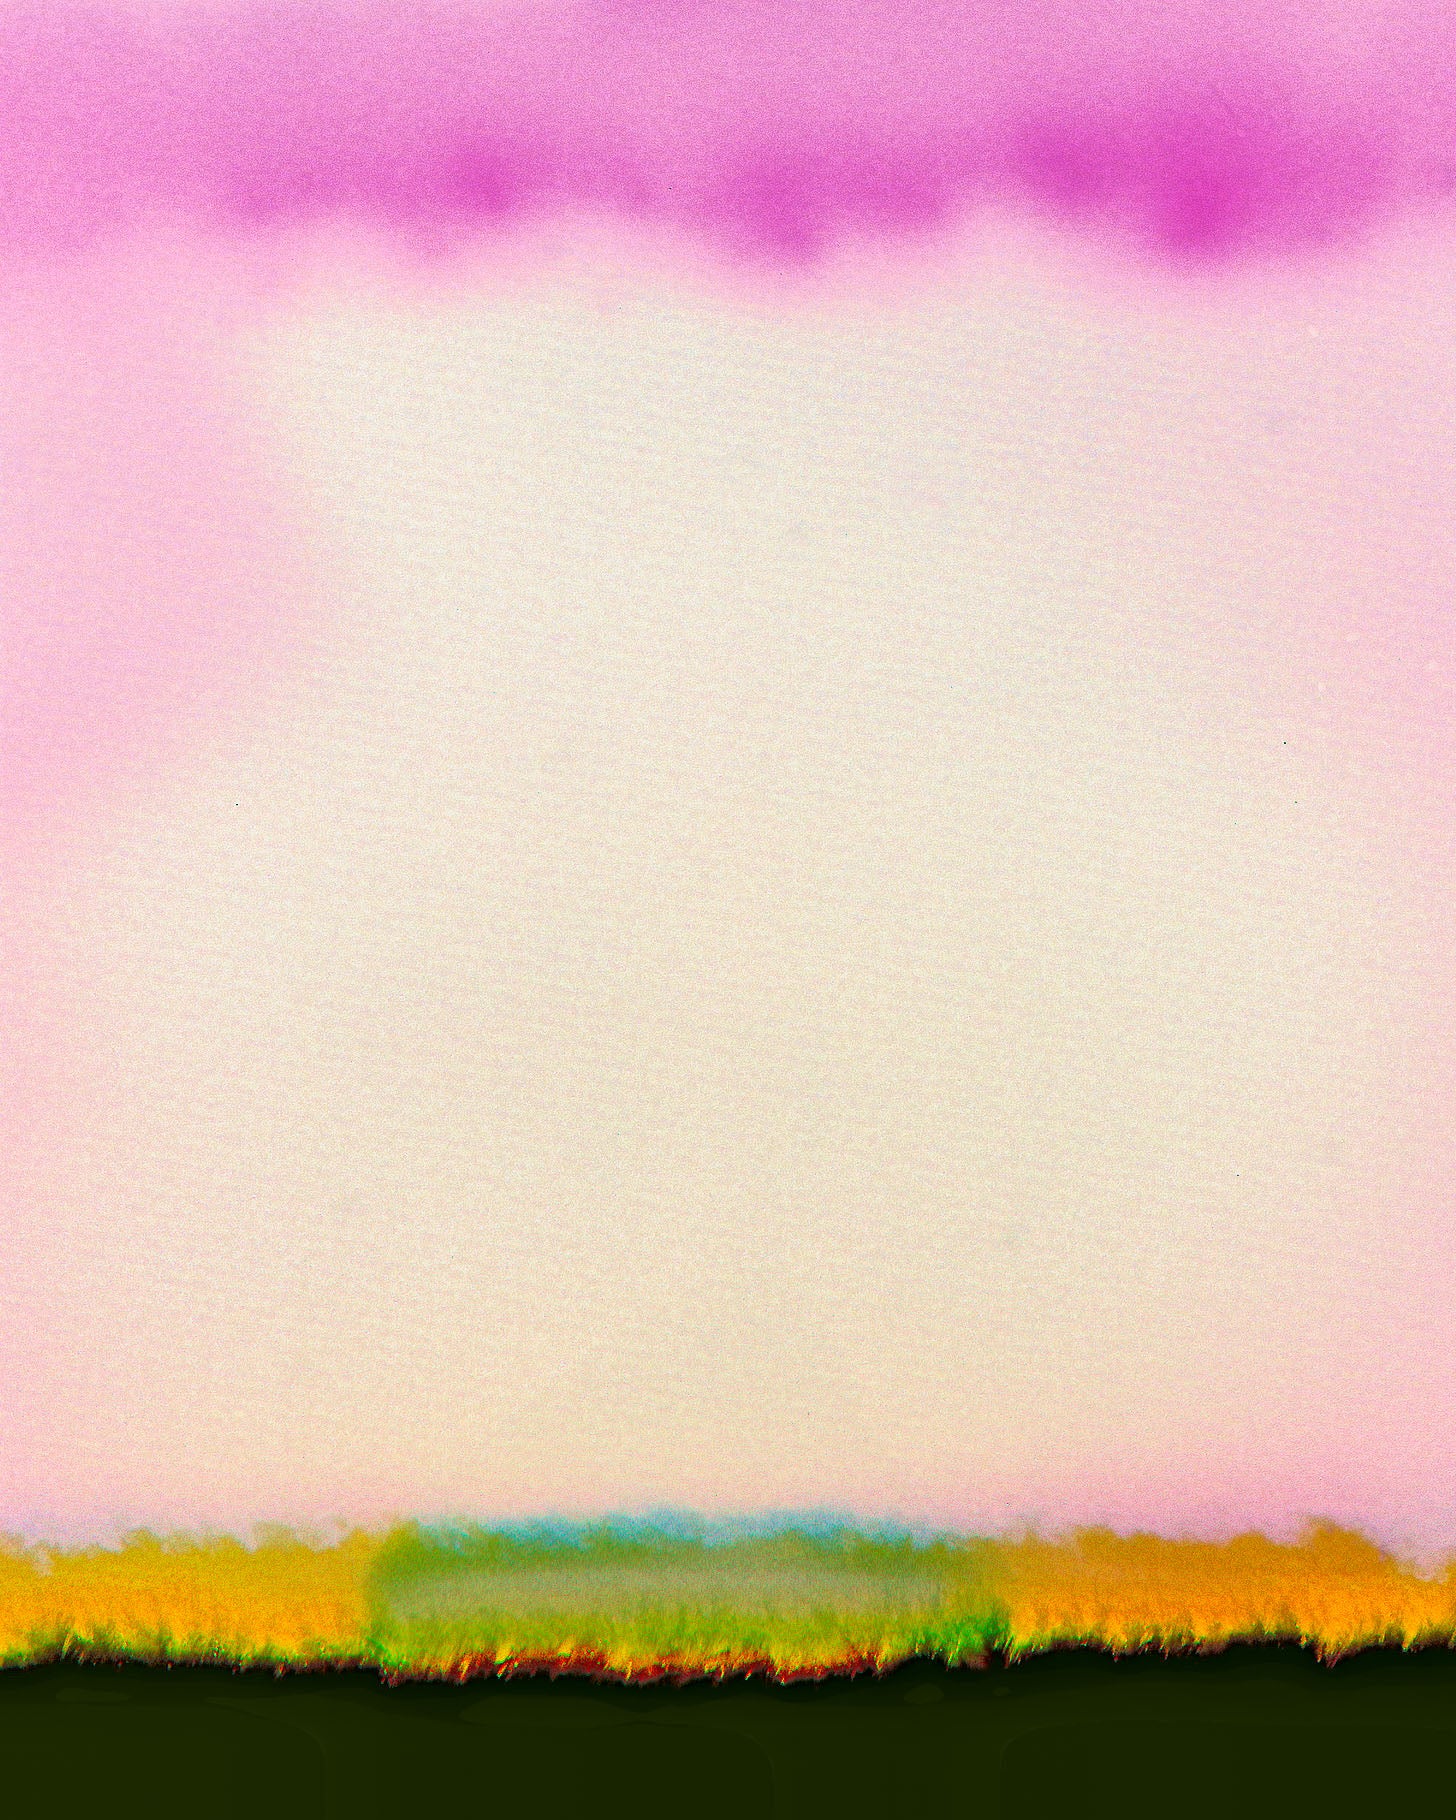 This image features "Heavy Cloud I," an artwork that conveys solitude with a vast expanse of soft, warm hues. At the bottom, there’s a hint of bright, fiery colours like a distant horizon, and above, a stretch of deep pink resembles a brooding cloud. The colours suggest a quiet moment of introspection, with the dark cloud promising a clearing of lighter shades, symbolising hope amidst solitude.